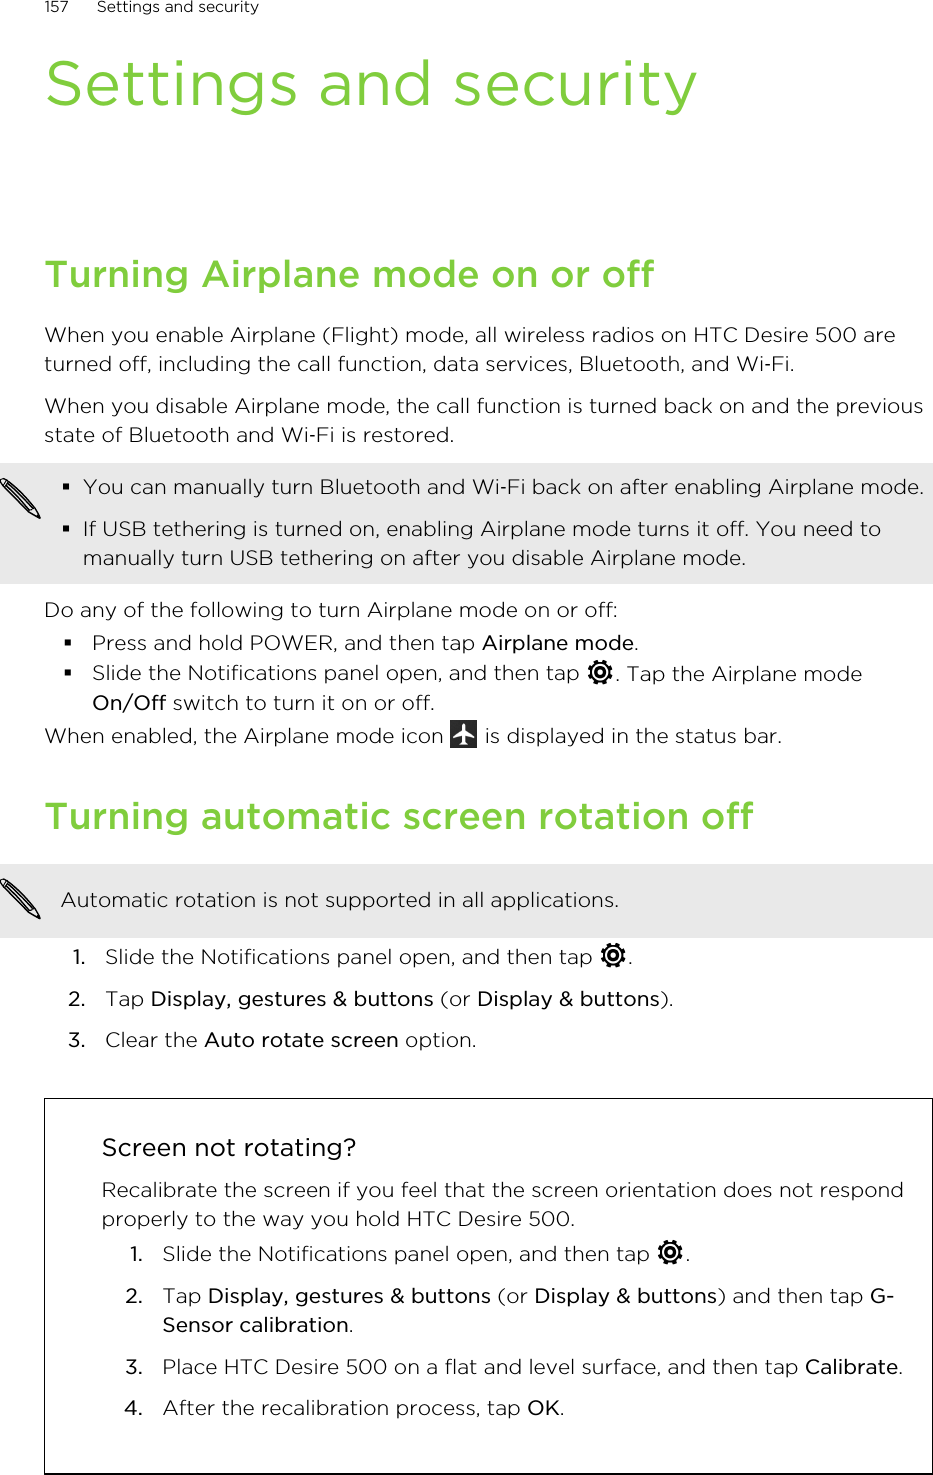 Settings and securityTurning Airplane mode on or offWhen you enable Airplane (Flight) mode, all wireless radios on HTC Desire 500 areturned off, including the call function, data services, Bluetooth, and Wi‑Fi.When you disable Airplane mode, the call function is turned back on and the previousstate of Bluetooth and Wi‑Fi is restored.§You can manually turn Bluetooth and Wi‑Fi back on after enabling Airplane mode.§If USB tethering is turned on, enabling Airplane mode turns it off. You need tomanually turn USB tethering on after you disable Airplane mode.Do any of the following to turn Airplane mode on or off:§Press and hold POWER, and then tap Airplane mode.§Slide the Notifications panel open, and then tap  . Tap the Airplane modeOn/Off switch to turn it on or off.When enabled, the Airplane mode icon   is displayed in the status bar.Turning automatic screen rotation offAutomatic rotation is not supported in all applications.1. Slide the Notifications panel open, and then tap  .2. Tap Display, gestures &amp; buttons (or Display &amp; buttons).3. Clear the Auto rotate screen option.Screen not rotating?Recalibrate the screen if you feel that the screen orientation does not respondproperly to the way you hold HTC Desire 500.1. Slide the Notifications panel open, and then tap  .2. Tap Display, gestures &amp; buttons (or Display &amp; buttons) and then tap G-Sensor calibration.3. Place HTC Desire 500 on a flat and level surface, and then tap Calibrate.4. After the recalibration process, tap OK.157 Settings and security